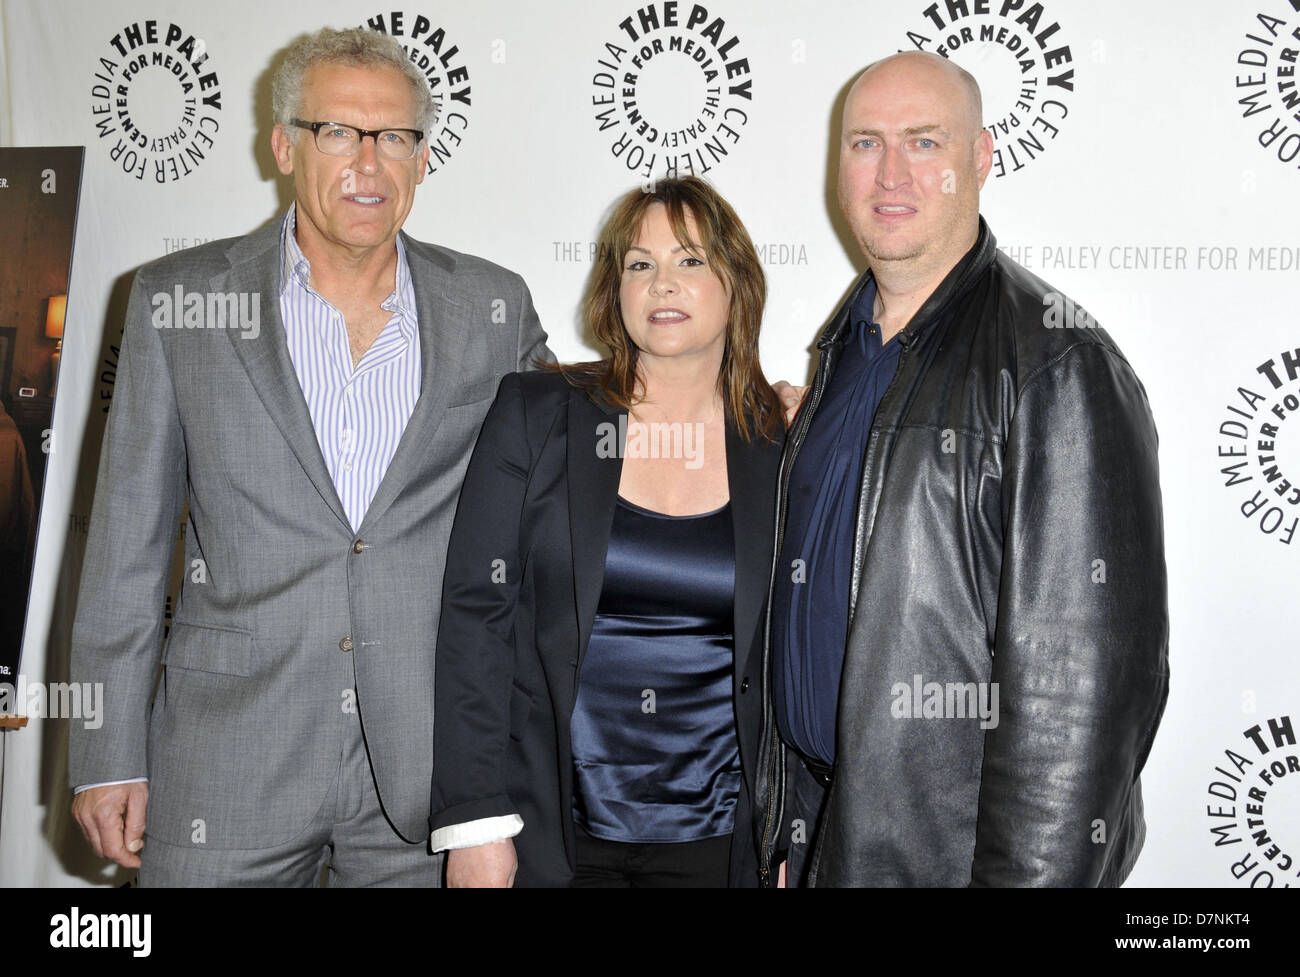 Los Angeles, California, U.S. May 10, 2013. Carlton Cuse, Kerry Ehrin, Shawn Ryan attending The Special Screening for ''Bates Motel'' held at the Paley Center For Media in Beverly Hills, California on May 10, 2013. 2013.(Credit Image: Credit:  D. Long/Globe Photos/ZUMAPRESS.com/Alamy Live News) Stock Photo